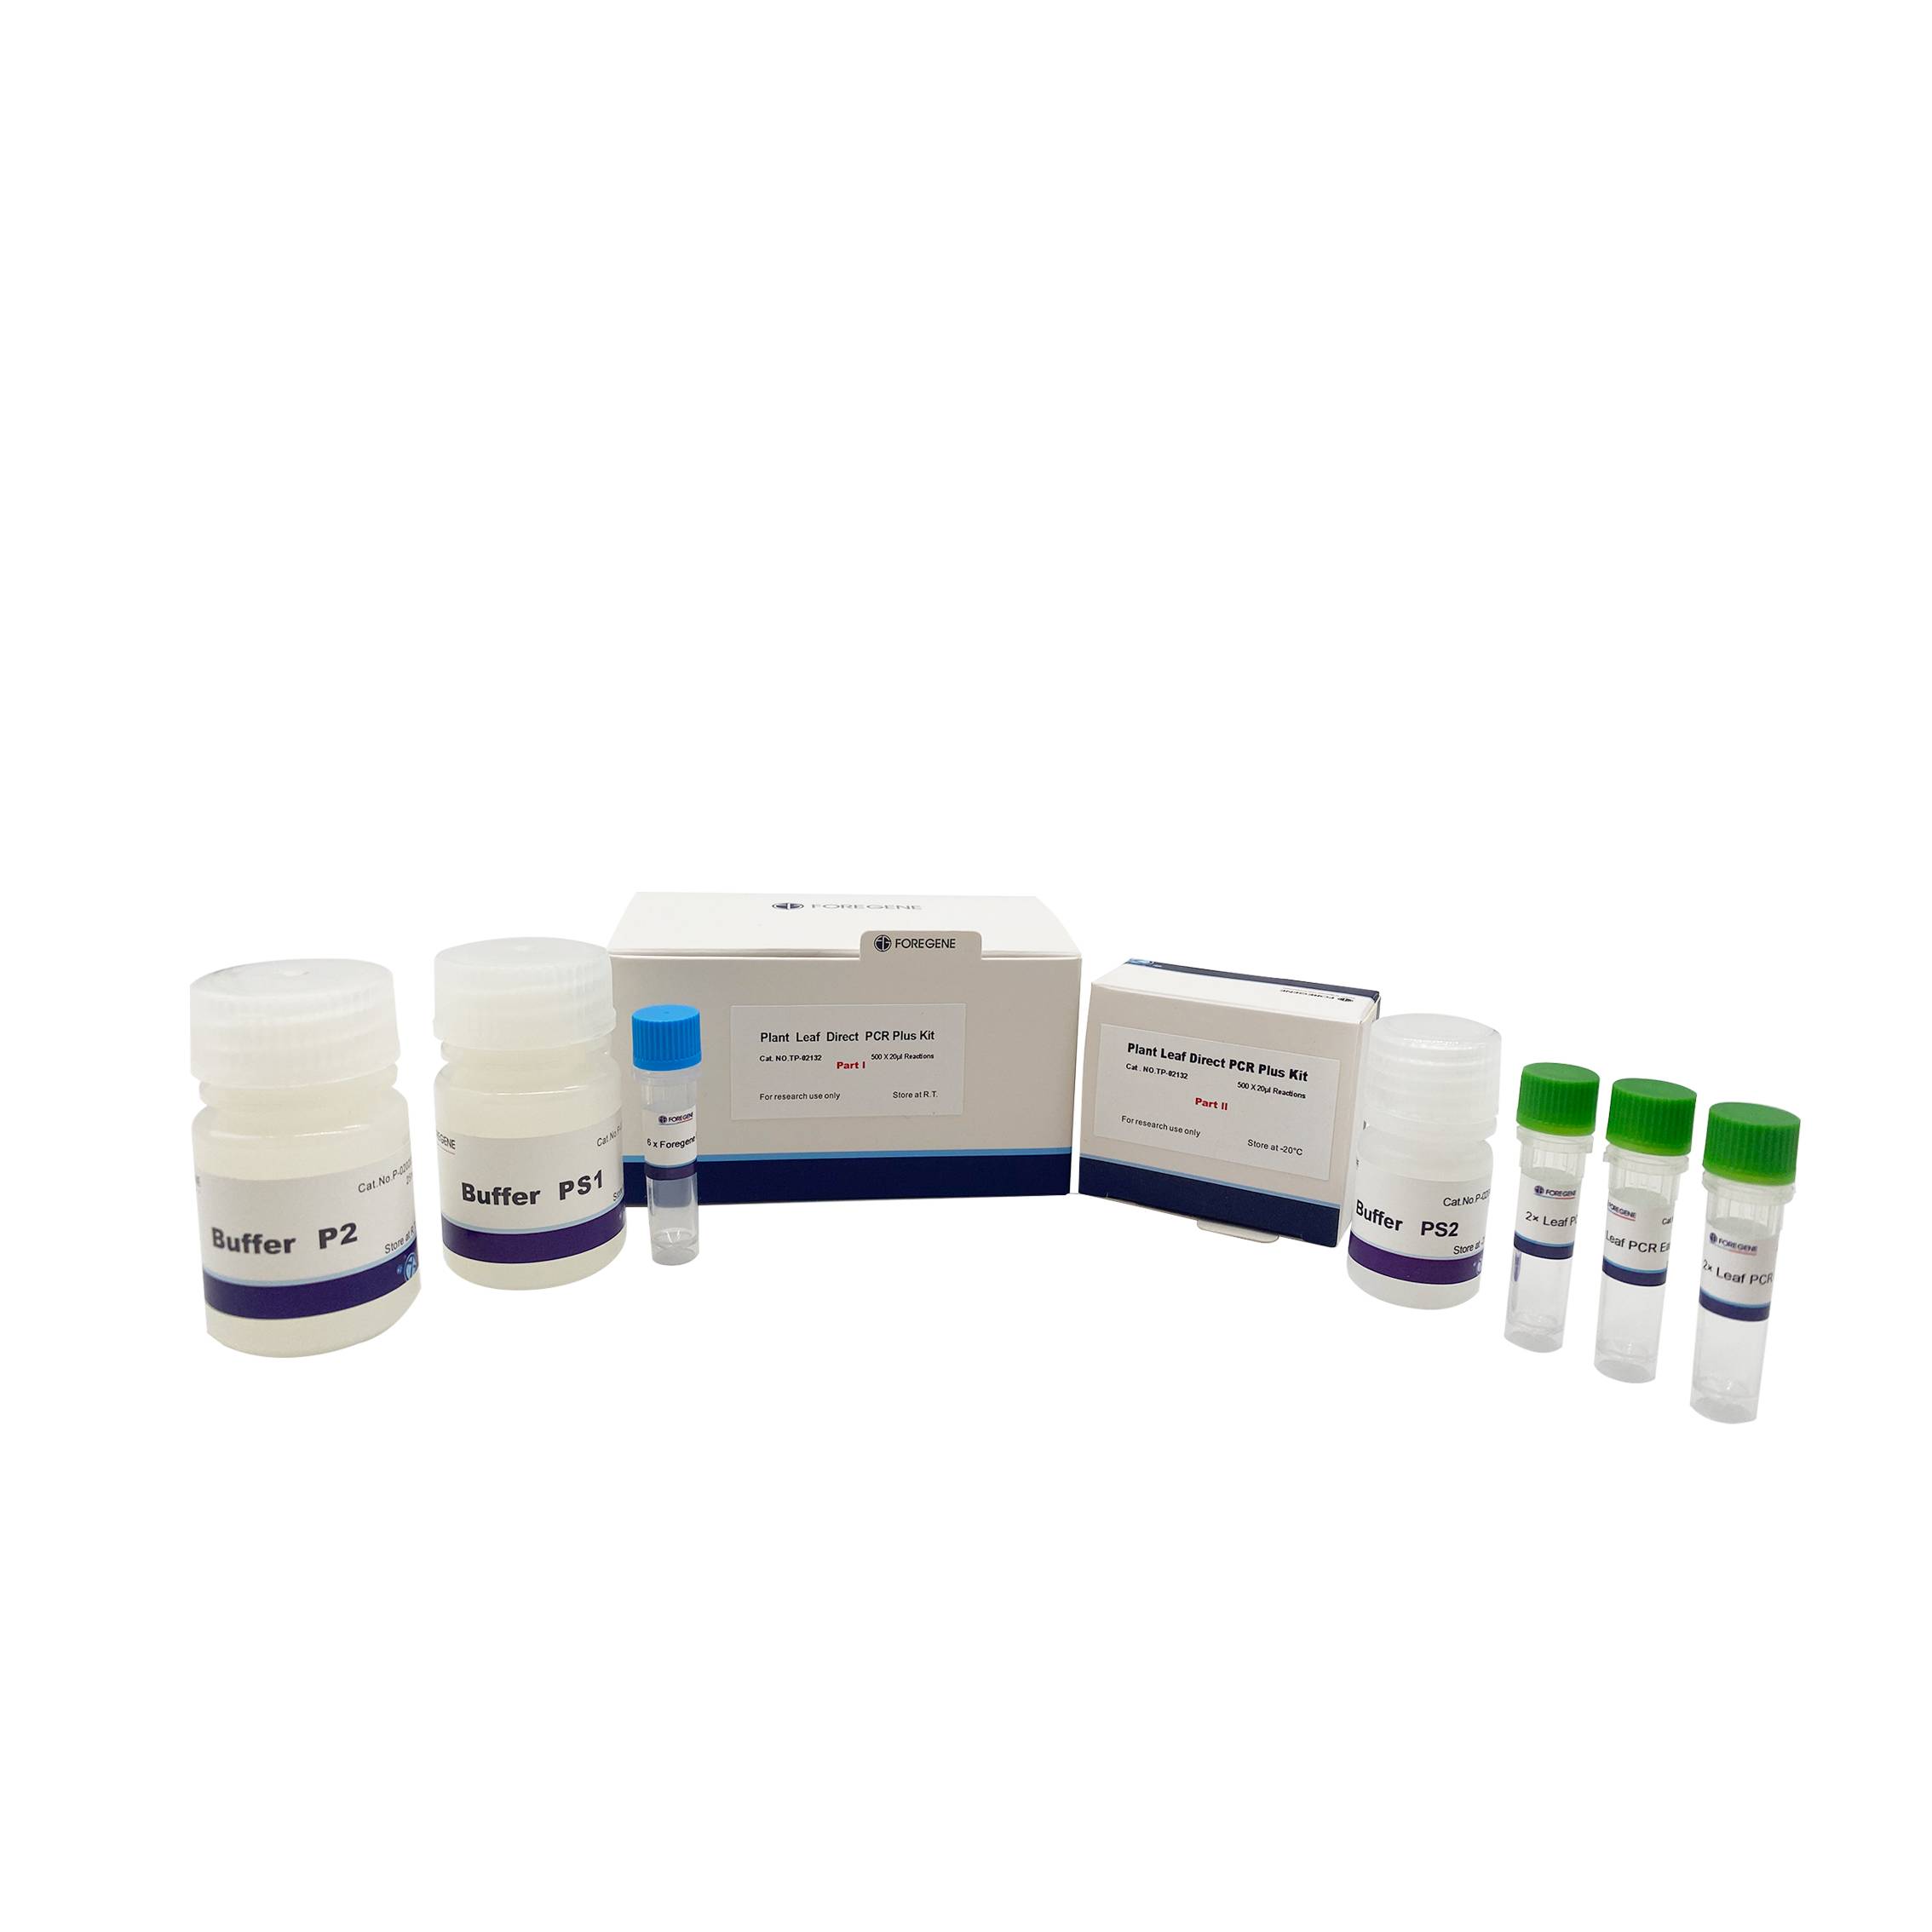 Plant leaf Direct PCR Plus kit (without Sampling Tools) Protocol Direct PCR from Plant Material Featured Image